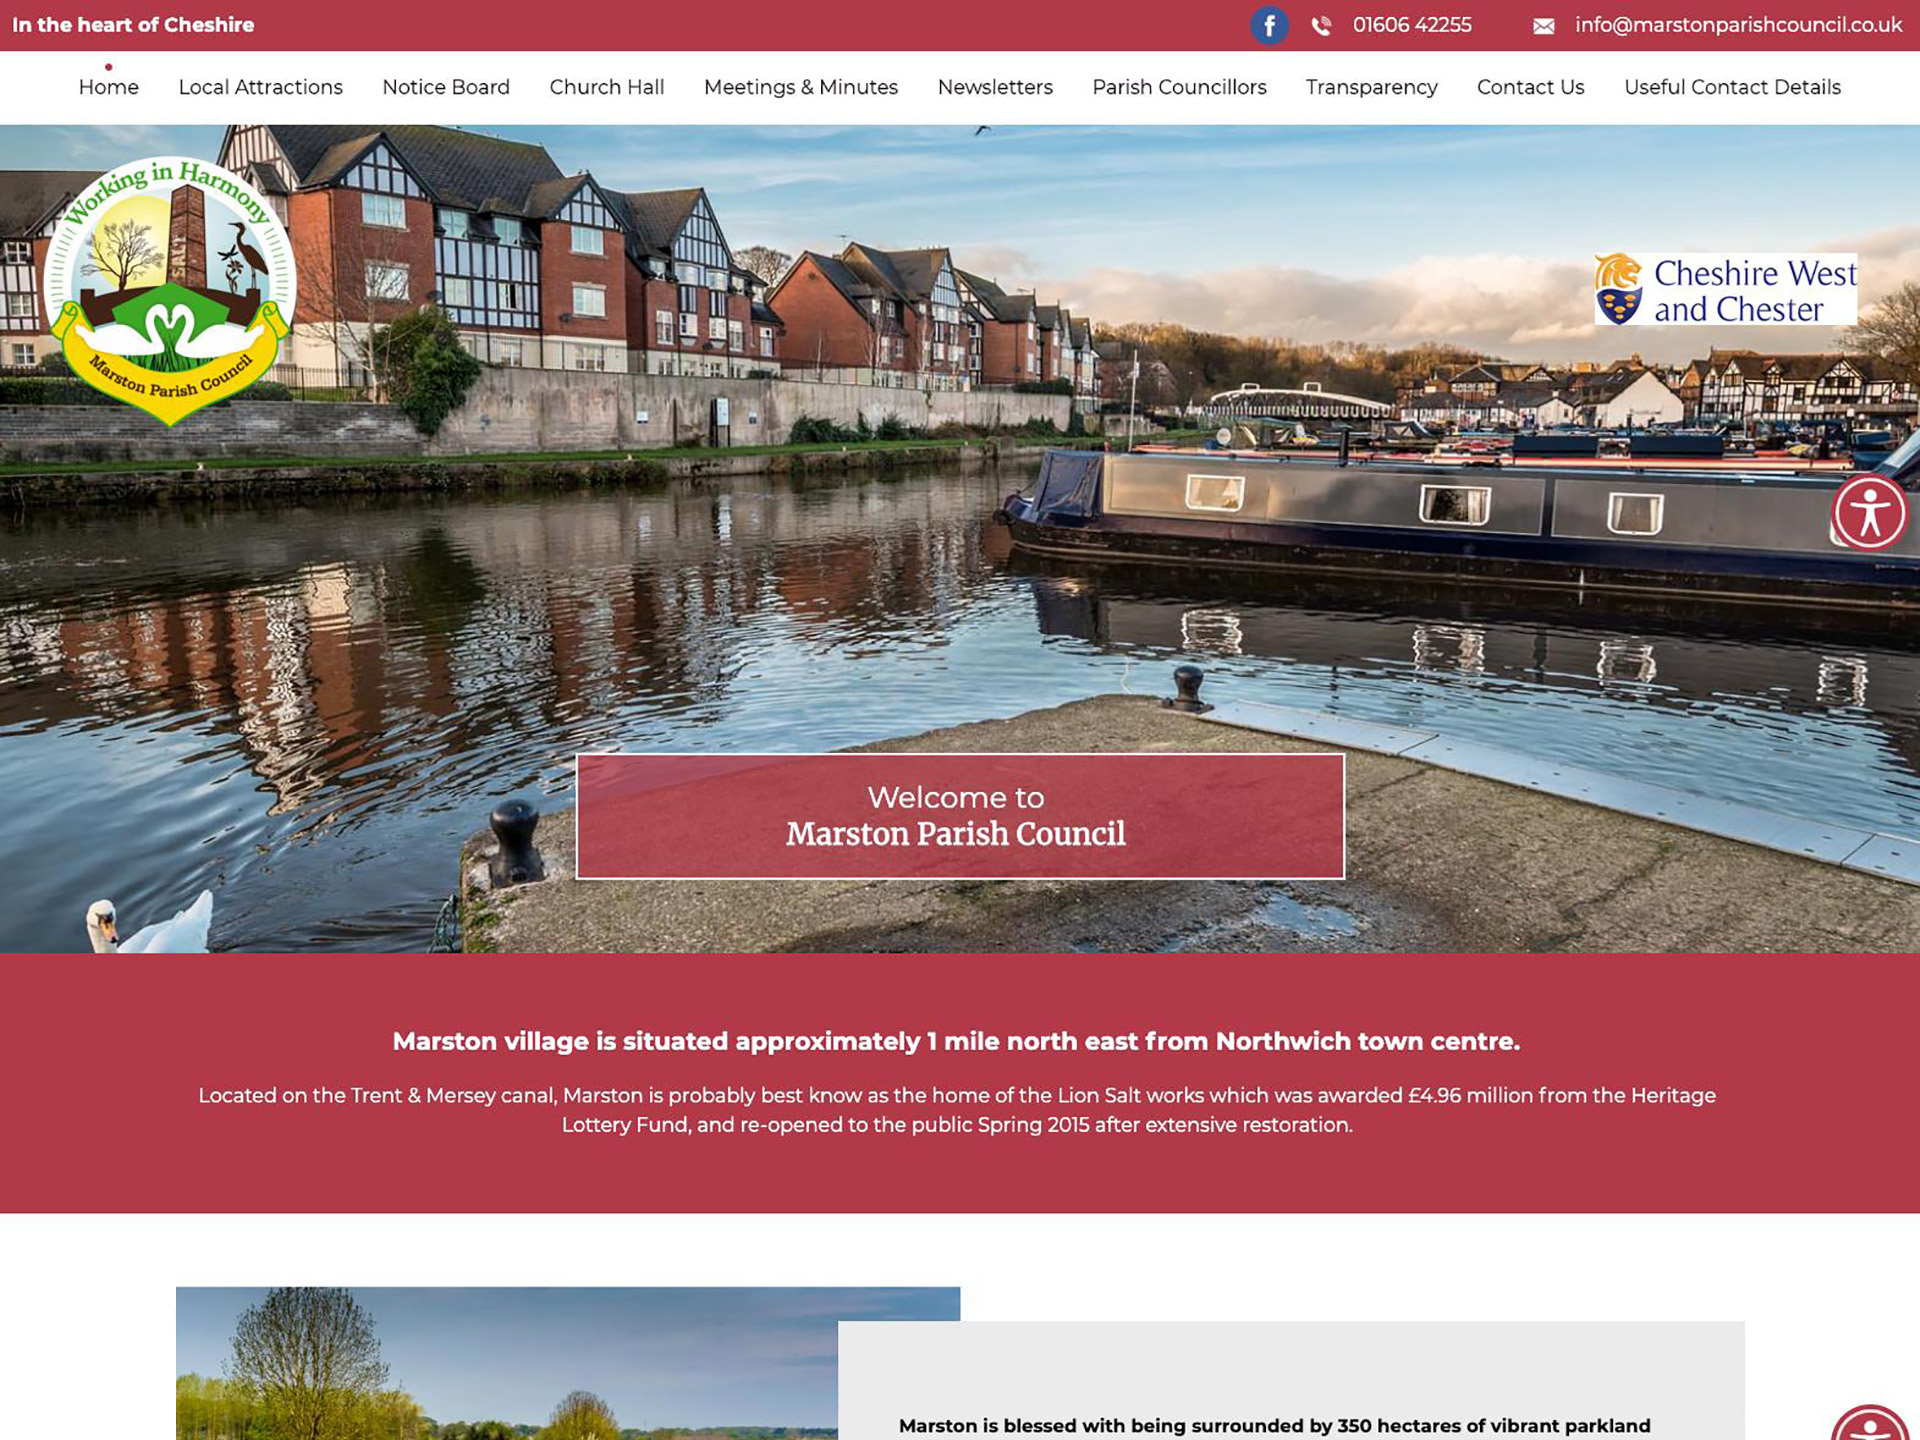 The Marston parish council website, created by it'seeze